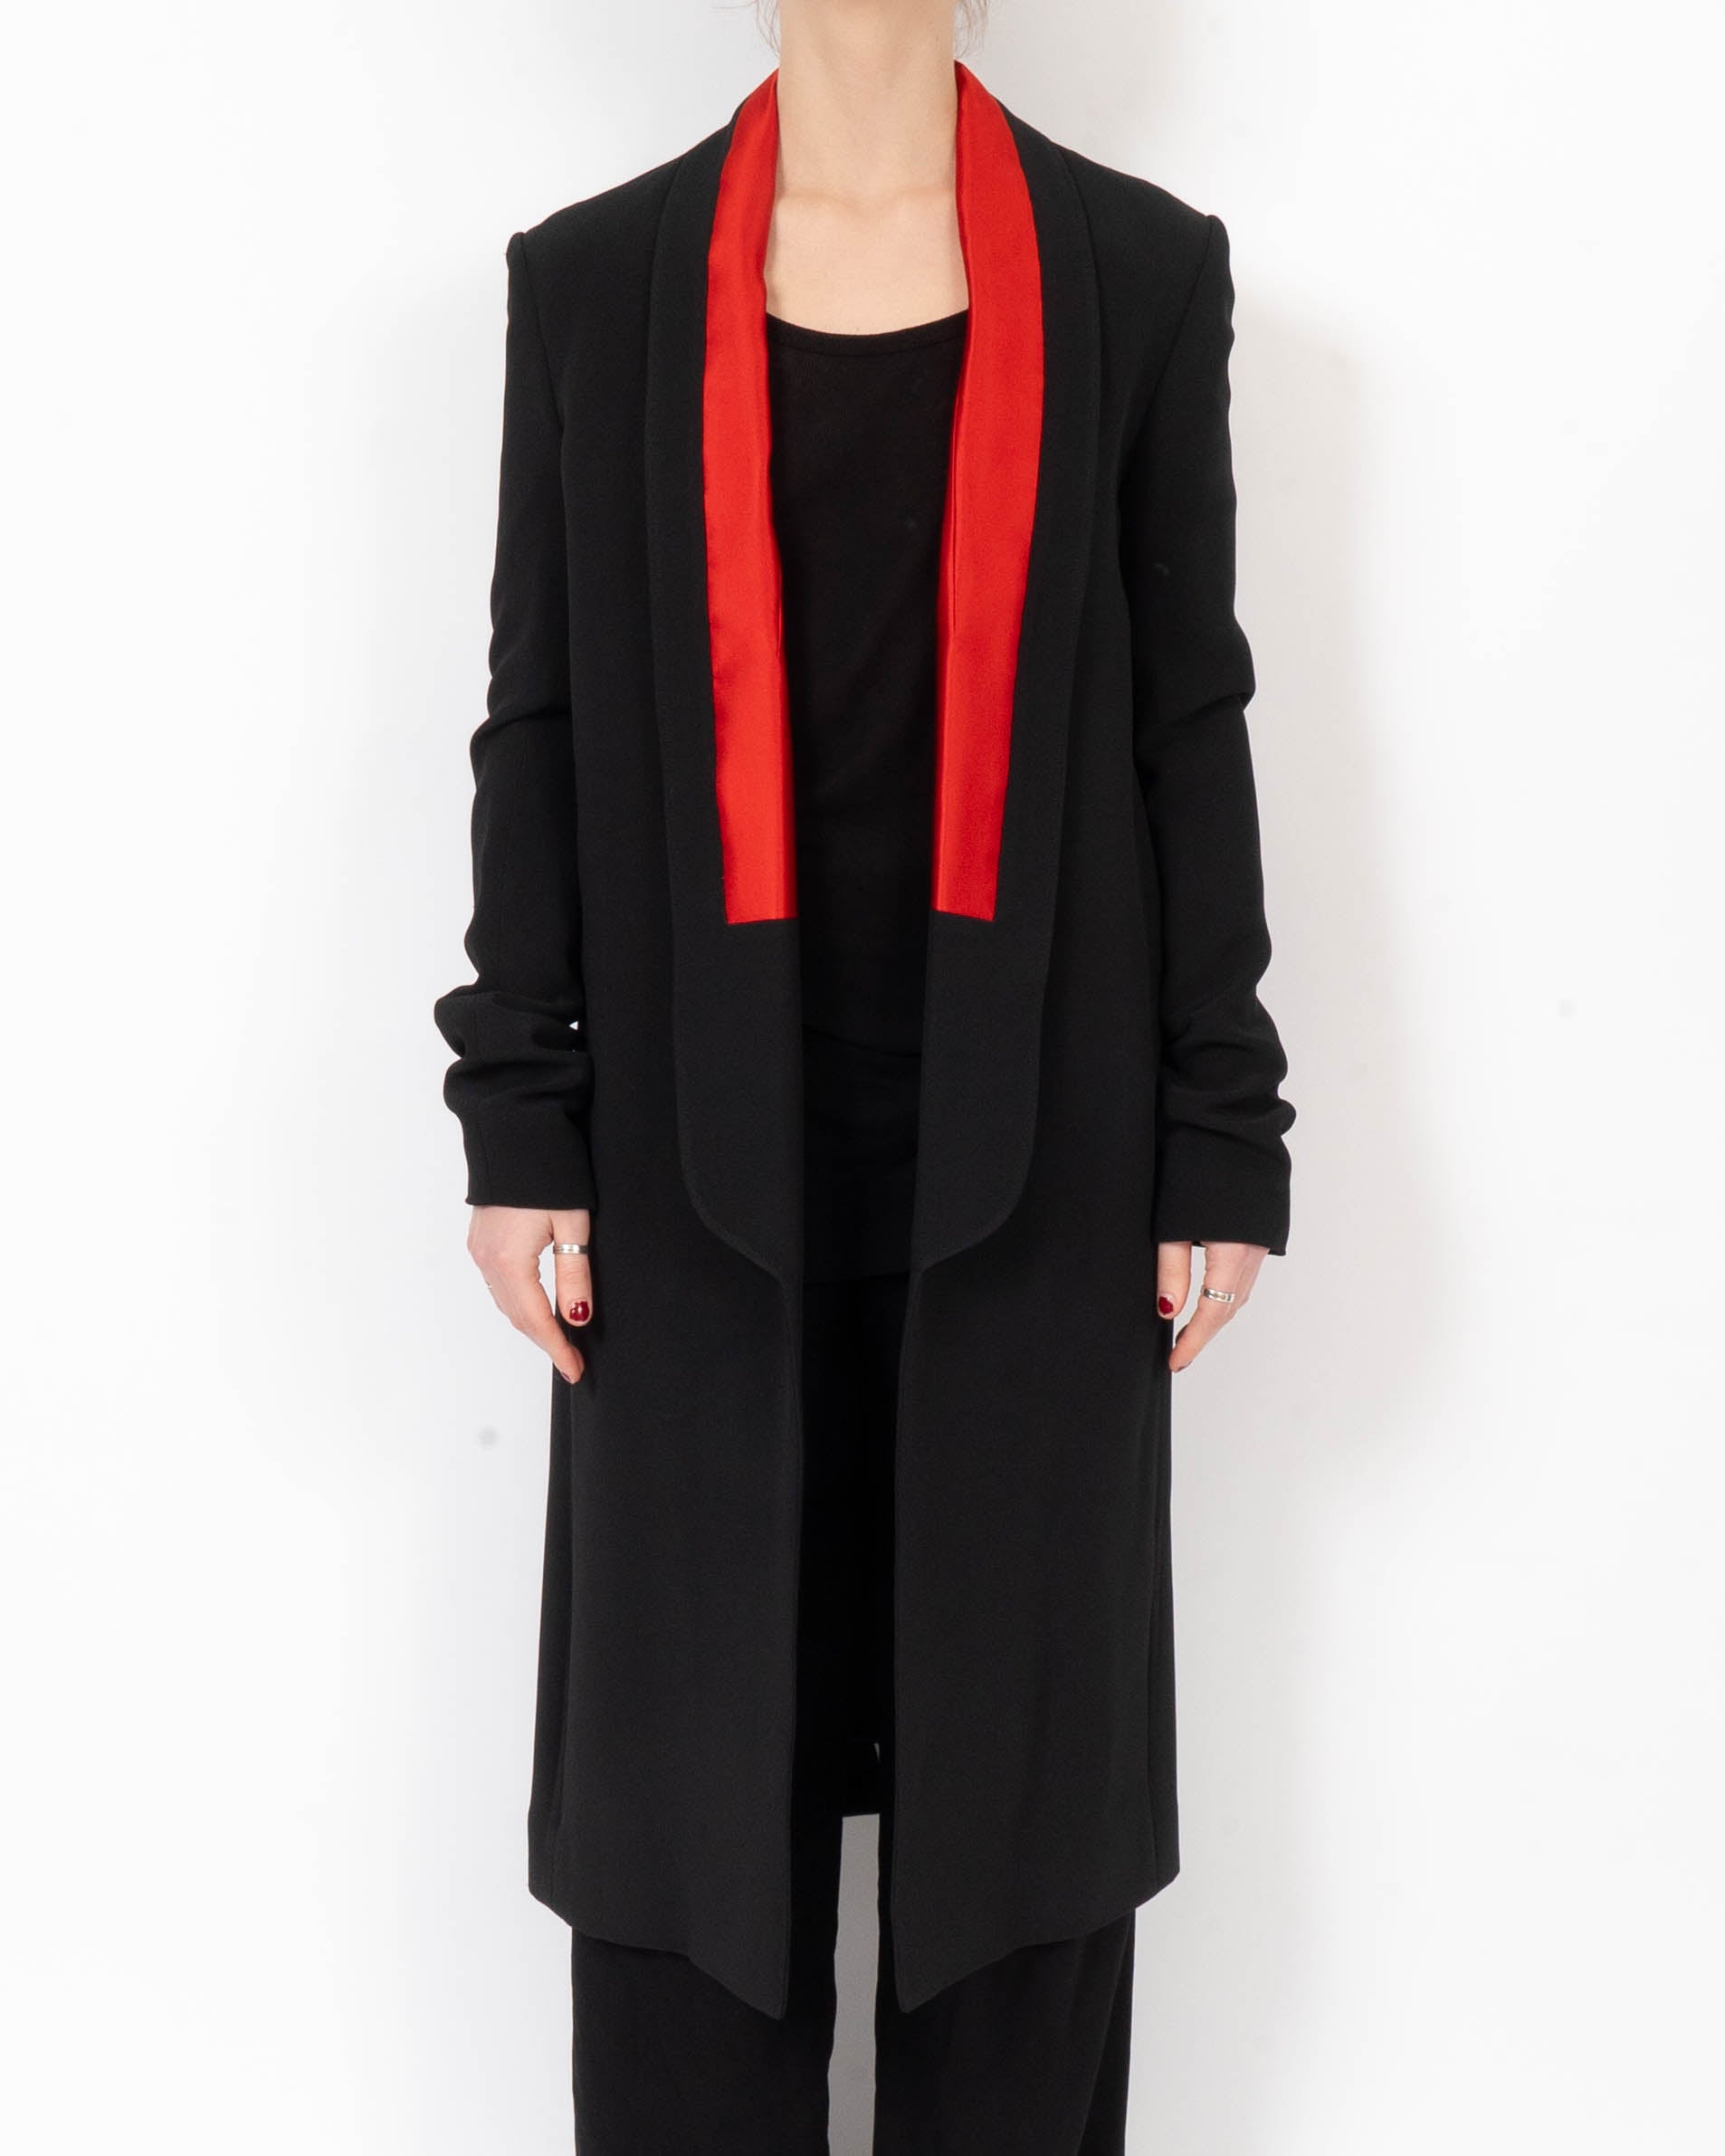 SS17 Overcoat in Black Wool with Red Contrast Collar